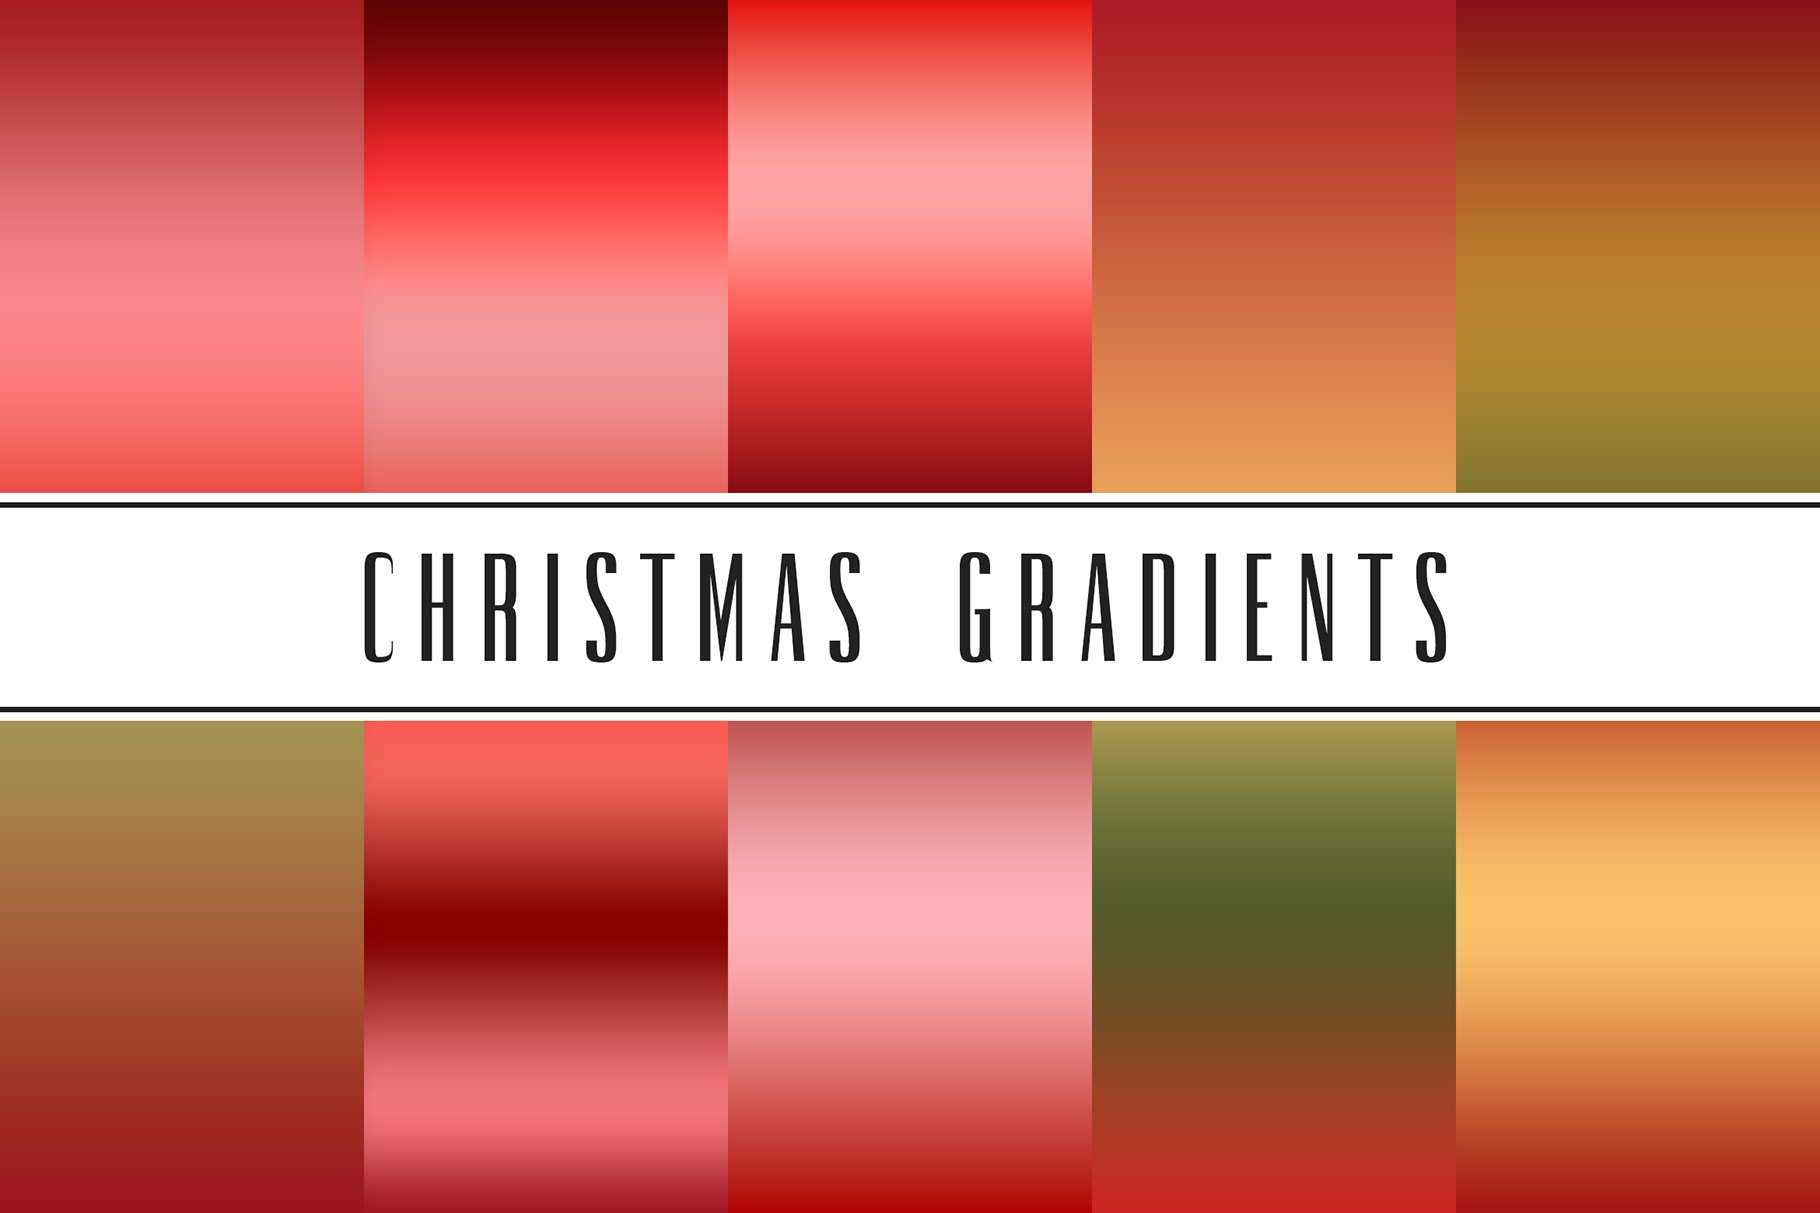 Christmas Gradients cover image.